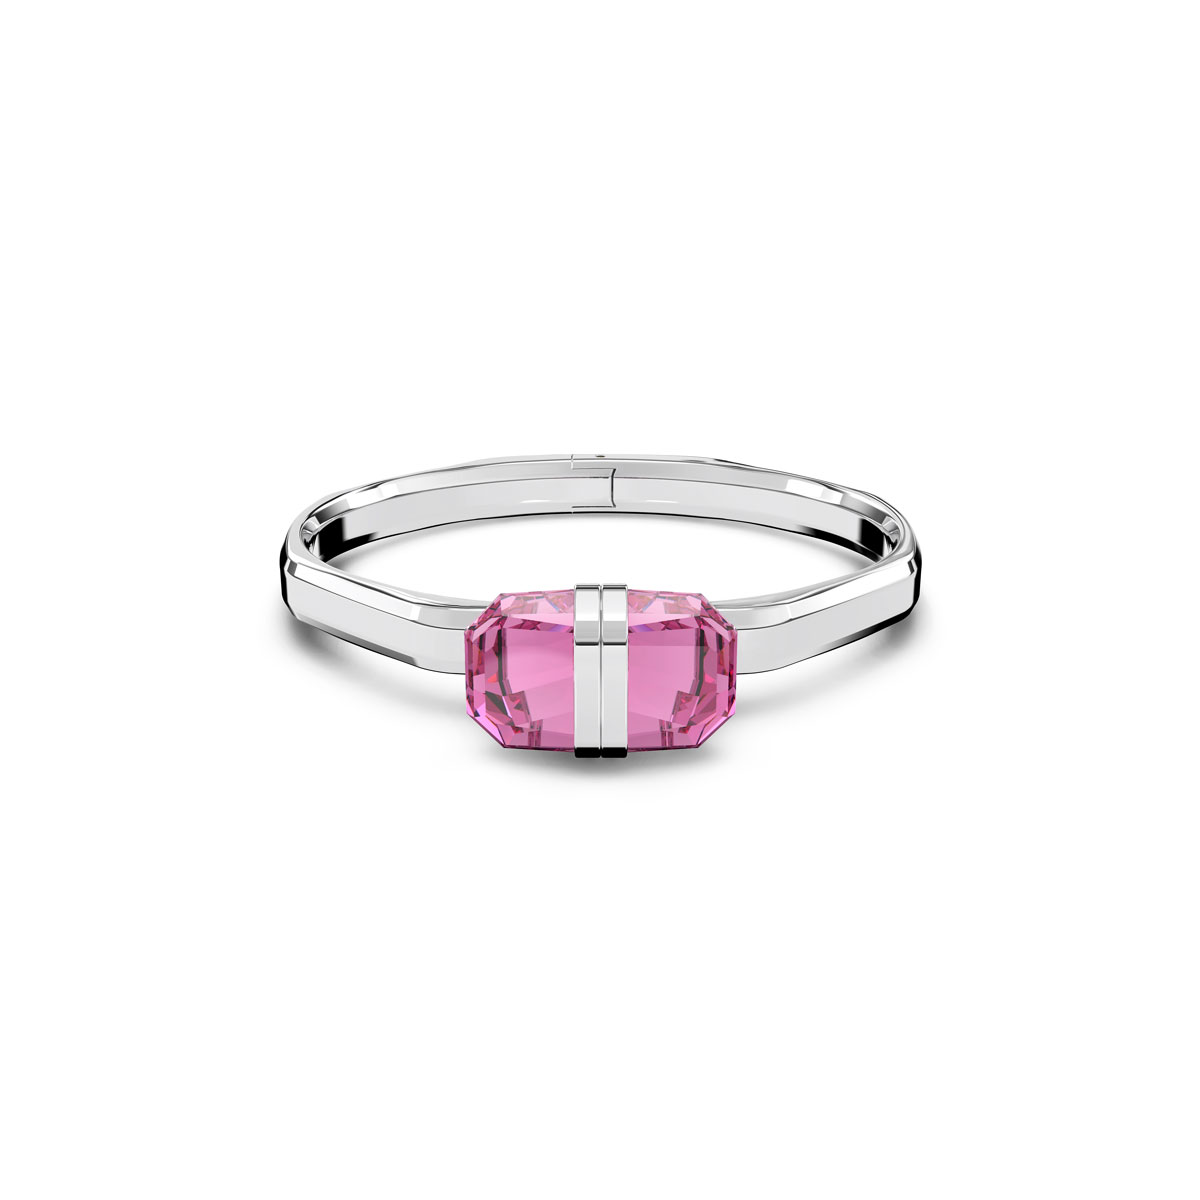 Swarovski Lucent Bangle, Magnetic, Pink, Stainless Steel